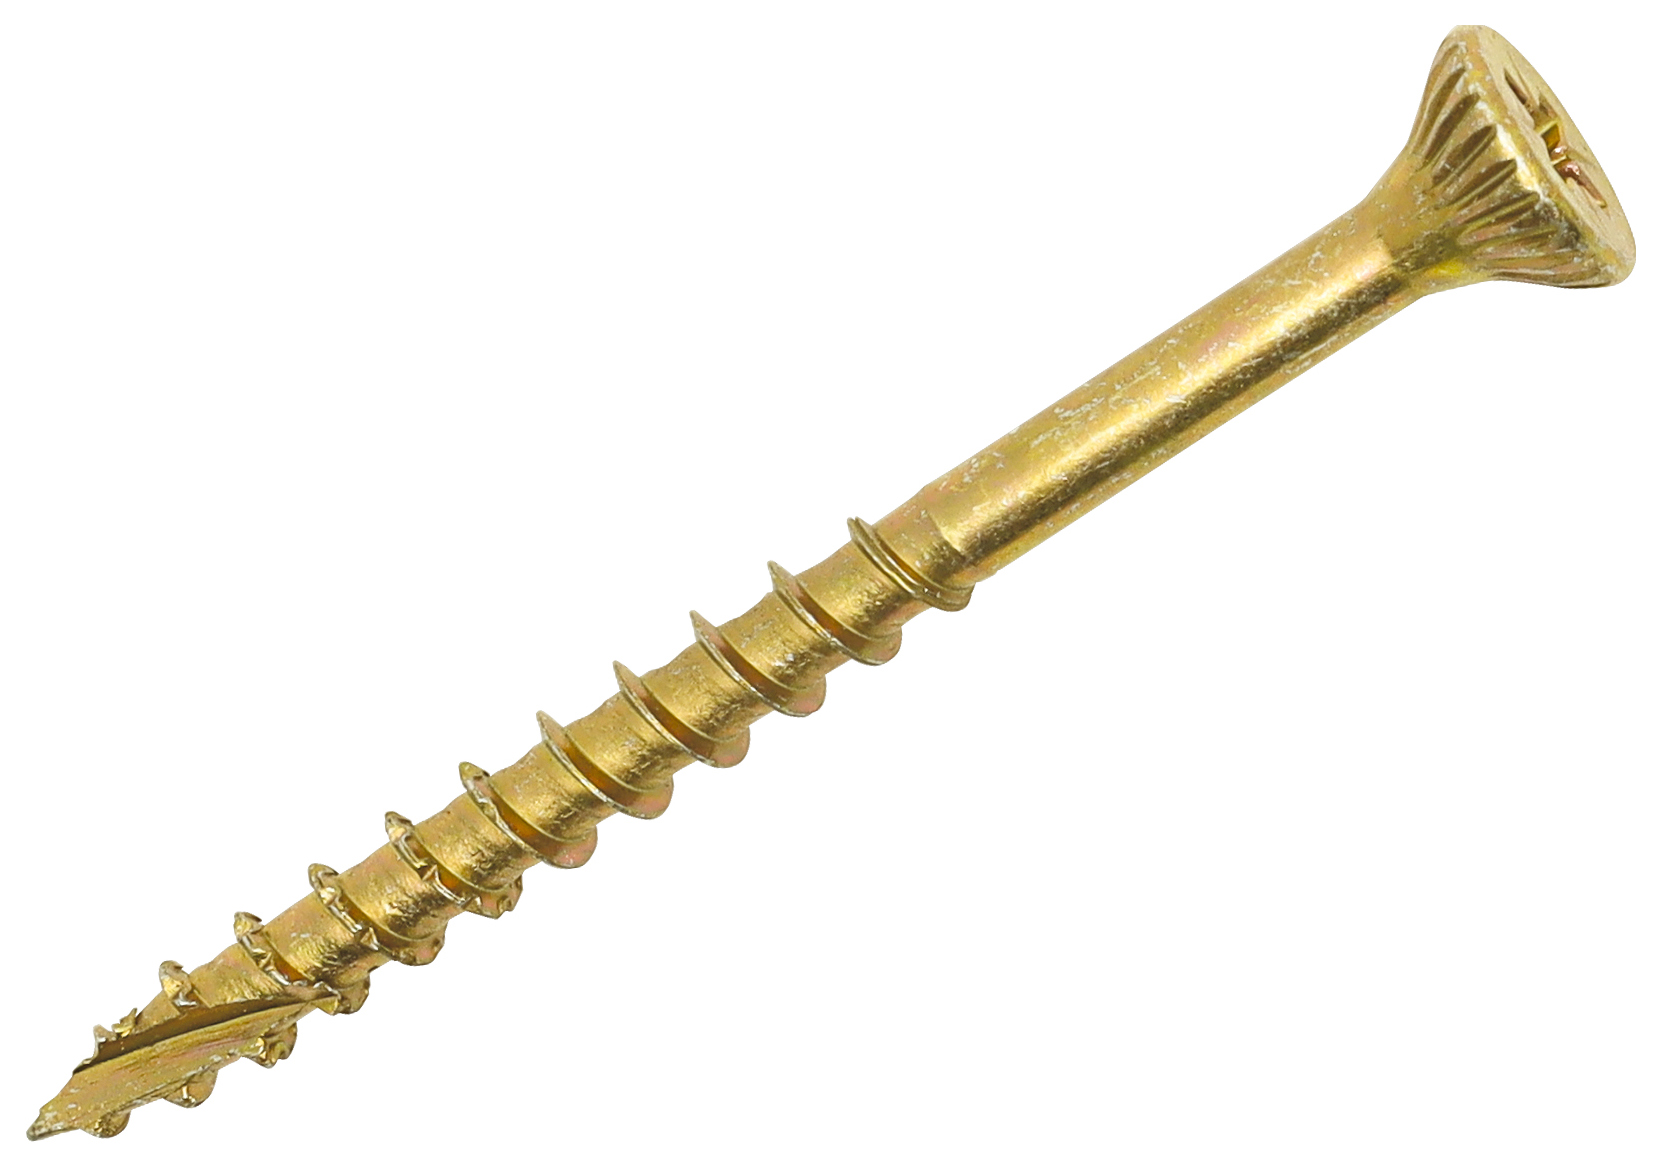 Optimaxx PZ Countersunk Passivated Double Reinforced Wood Screw - 5 x 60mm - Pack of 200